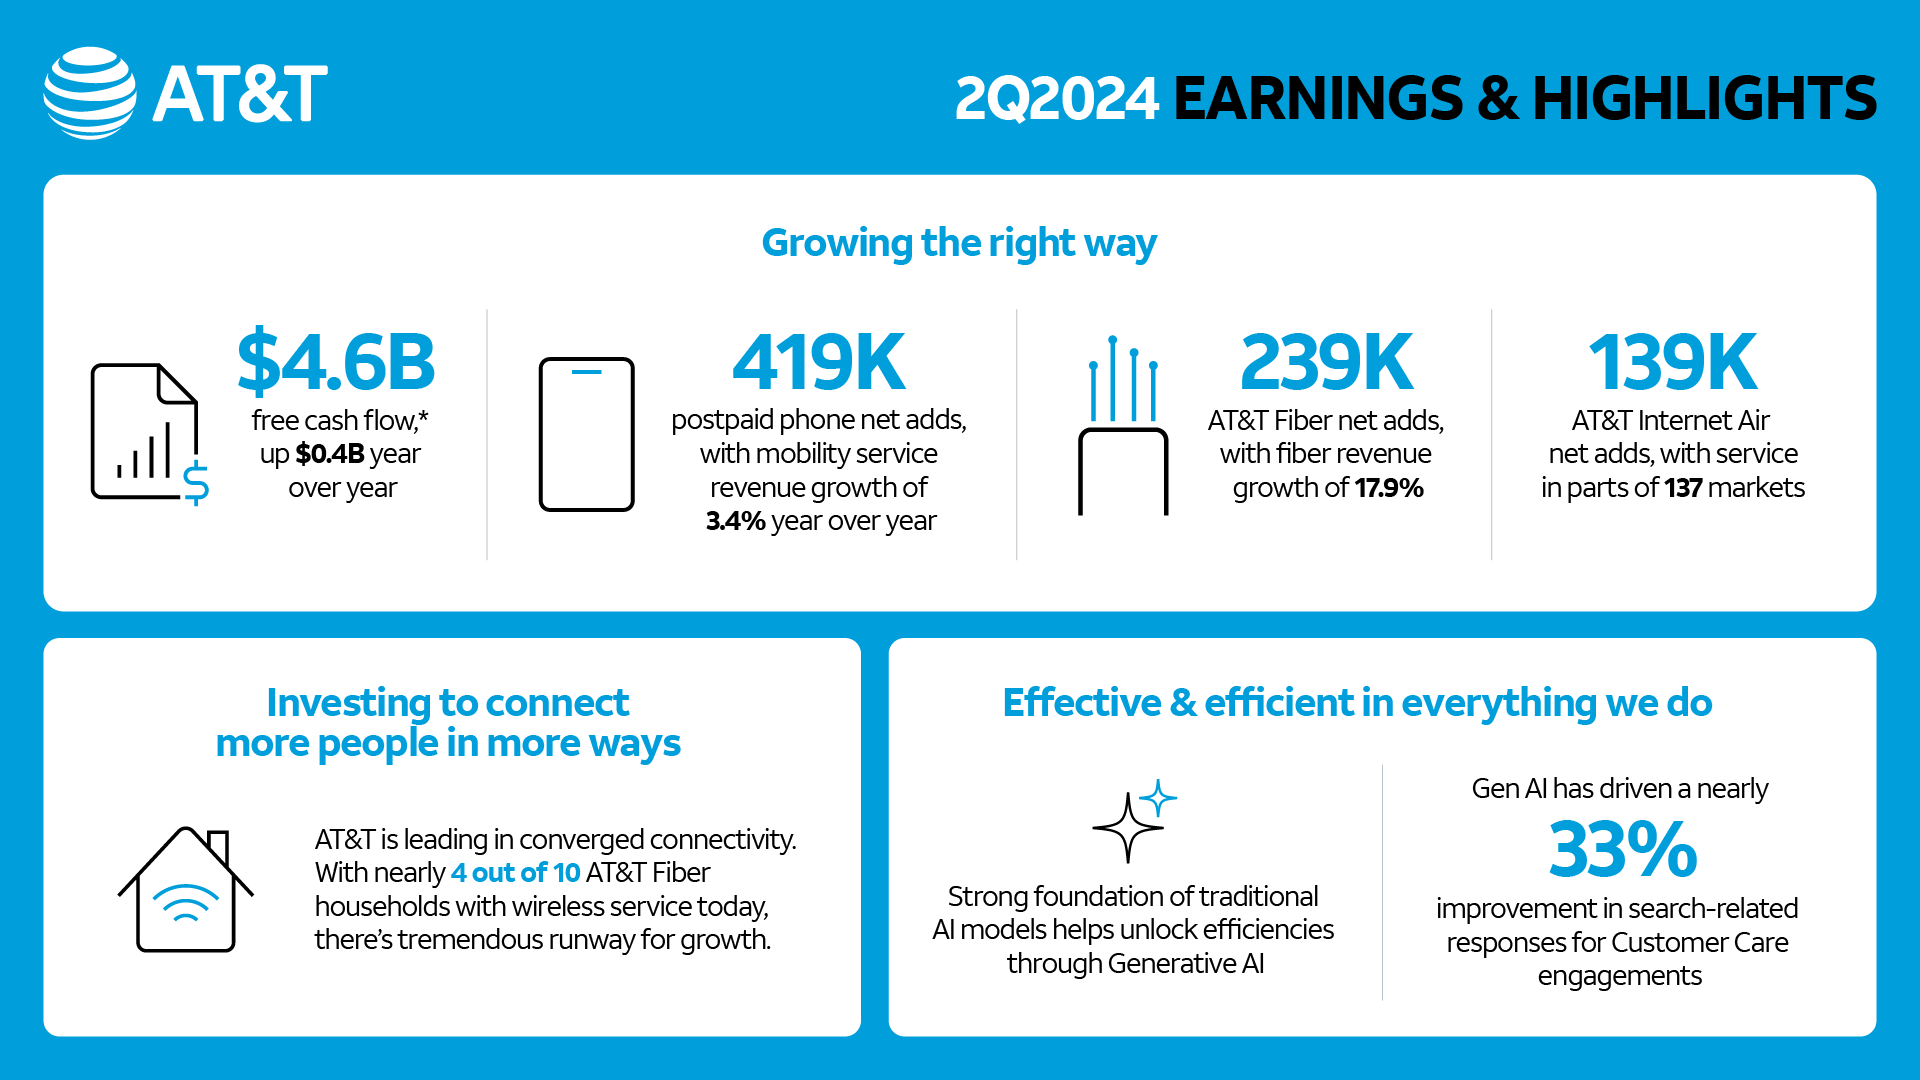 AT&T 2Q2024 Earnings and Highlights infographic